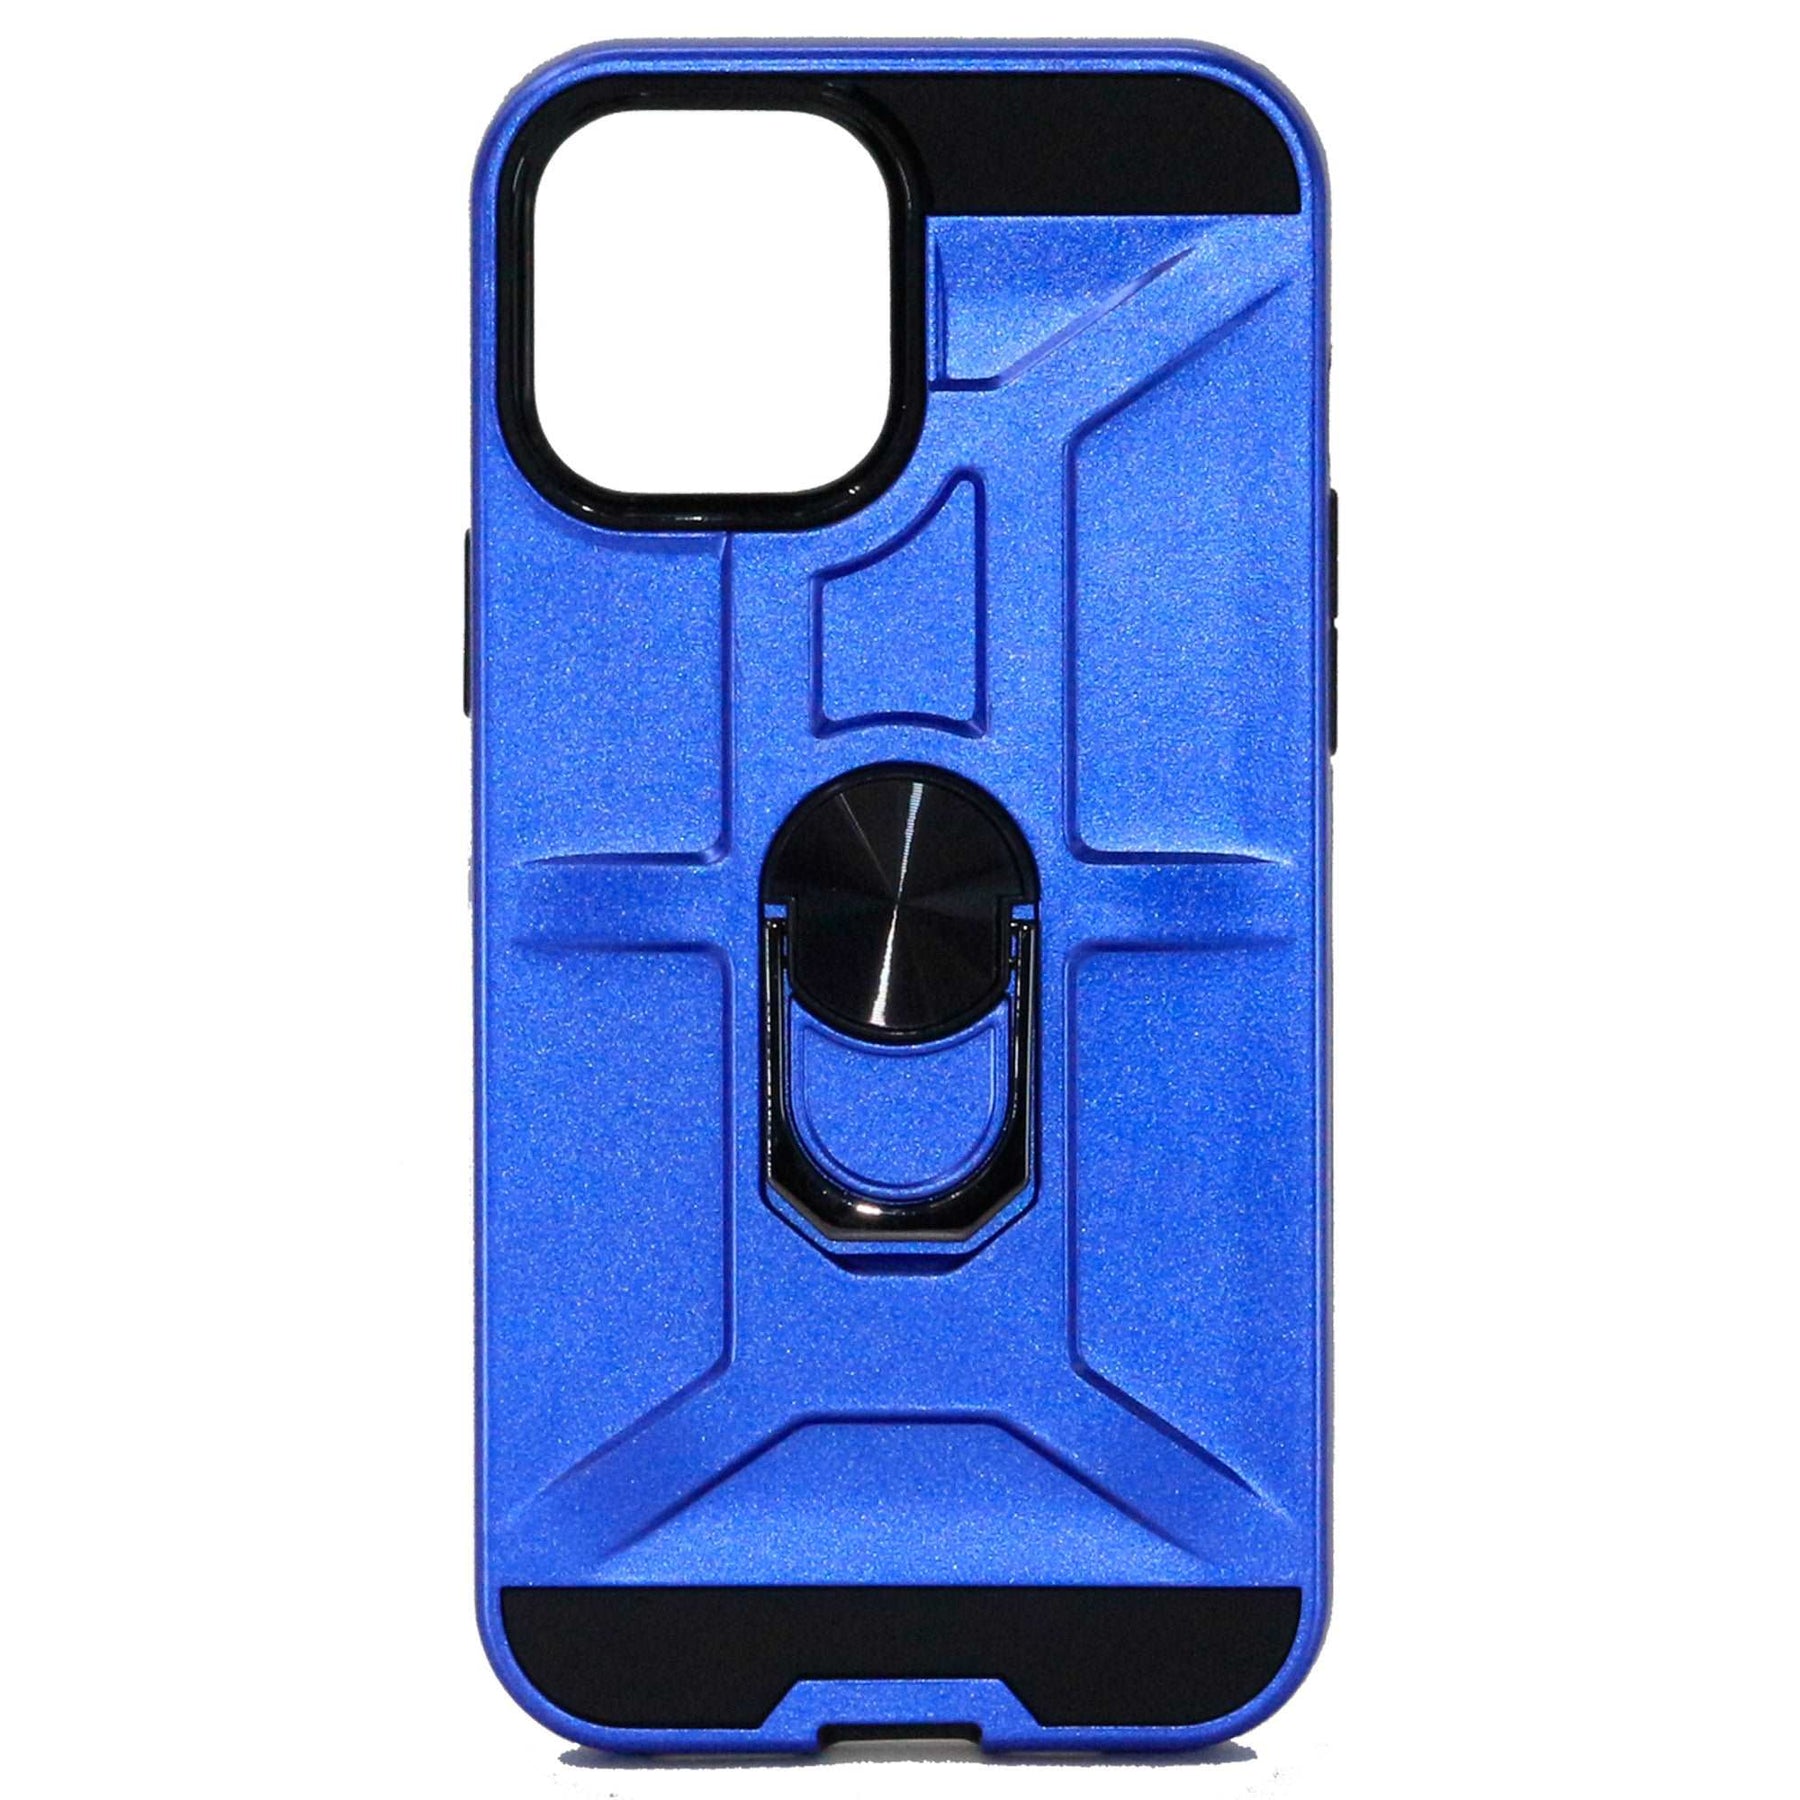 iPhone 12 pro max blue ring case